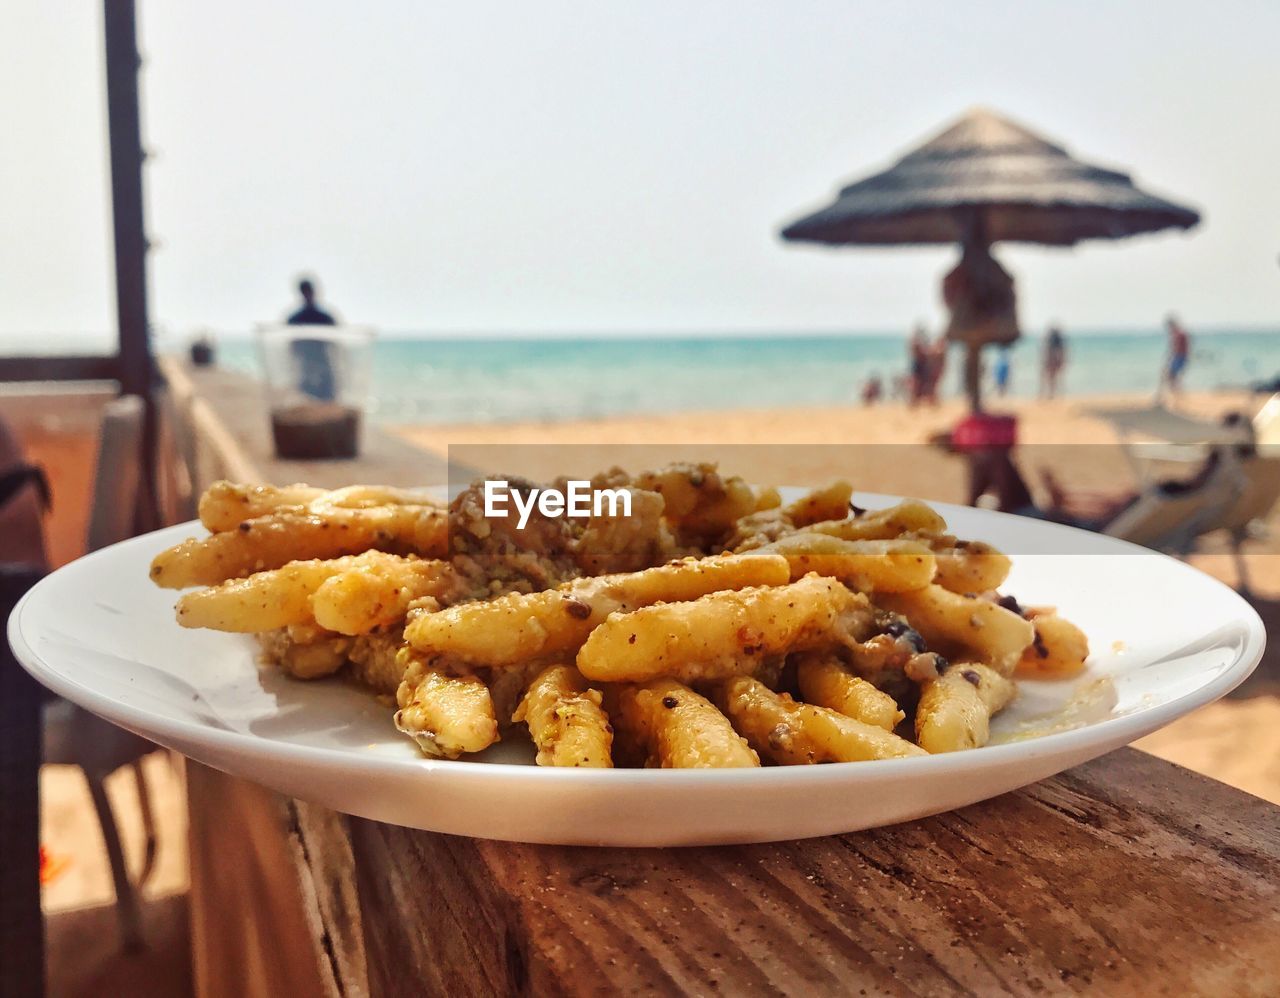 CLOSE-UP OF FOOD ON TABLE AT BEACH